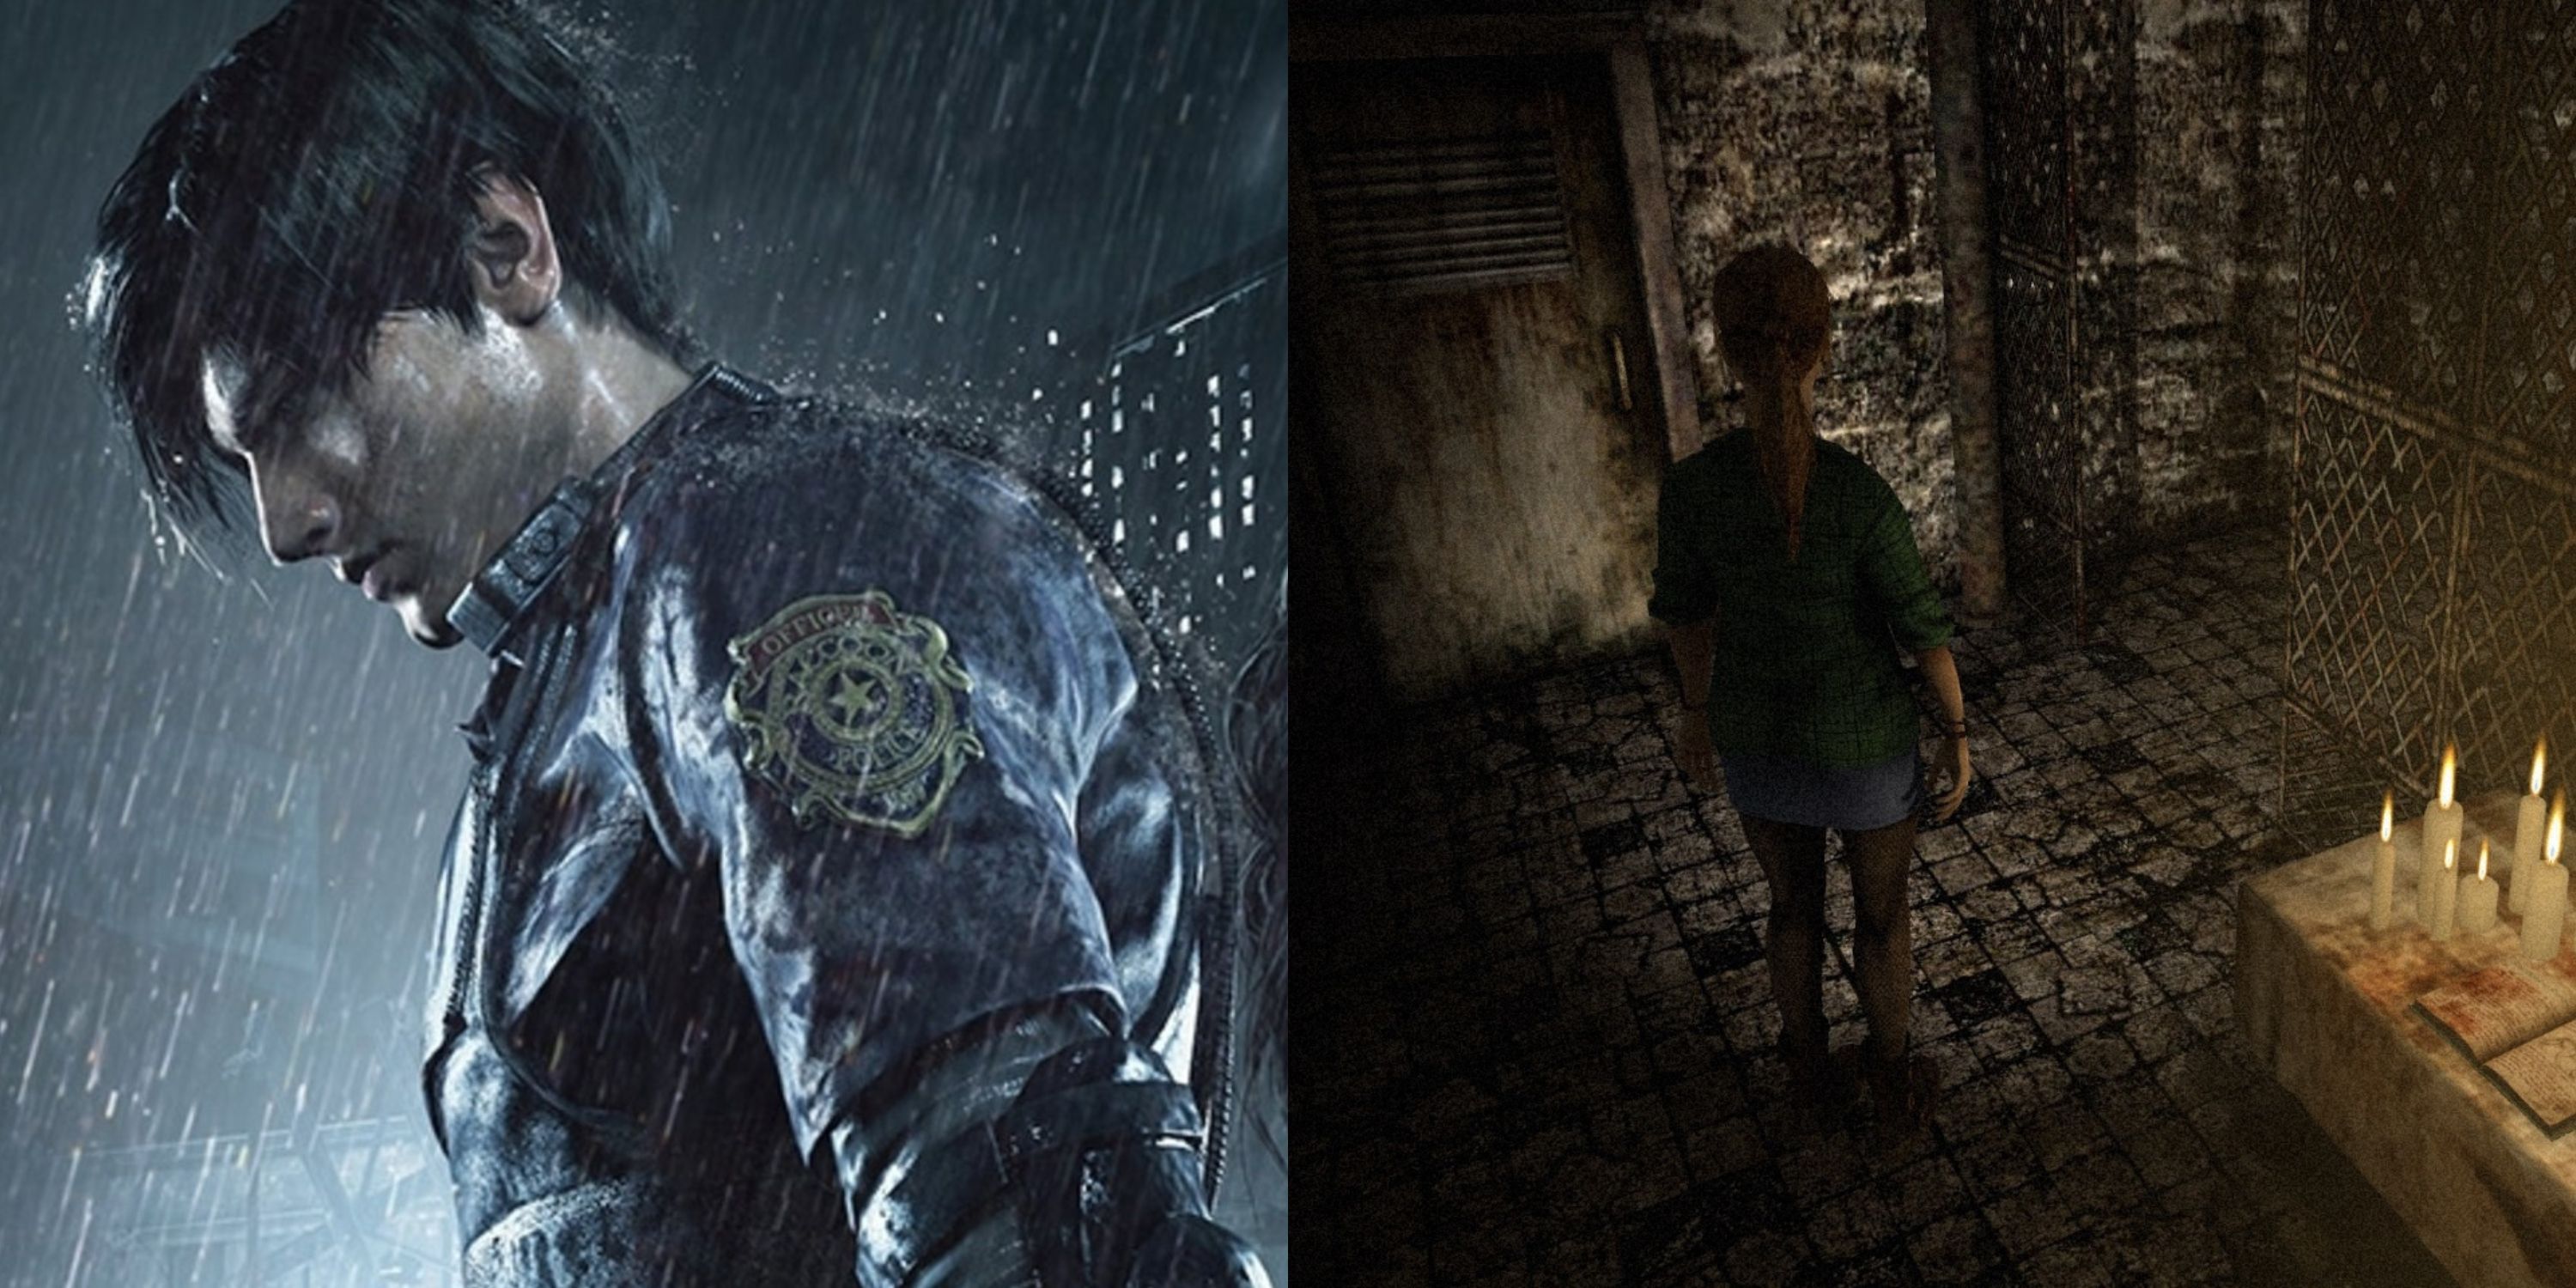 Featured image Leon from Resident Evil 2 and Abigail from Simulacrum